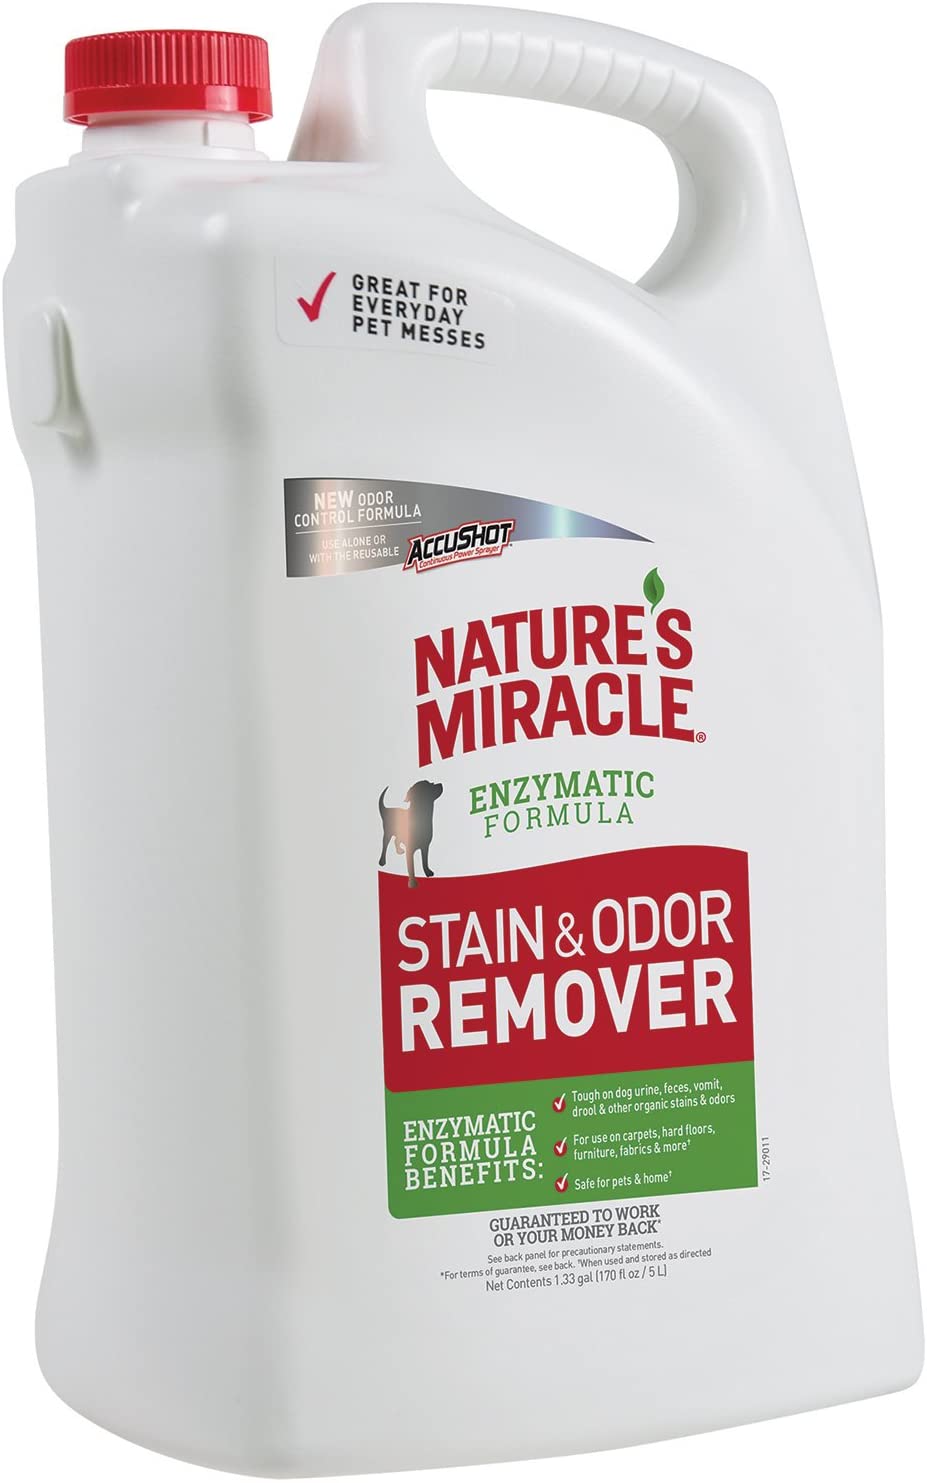 Nature’s Miracle Dog Enzymatic Stain & Odor Remover AMAZON dog